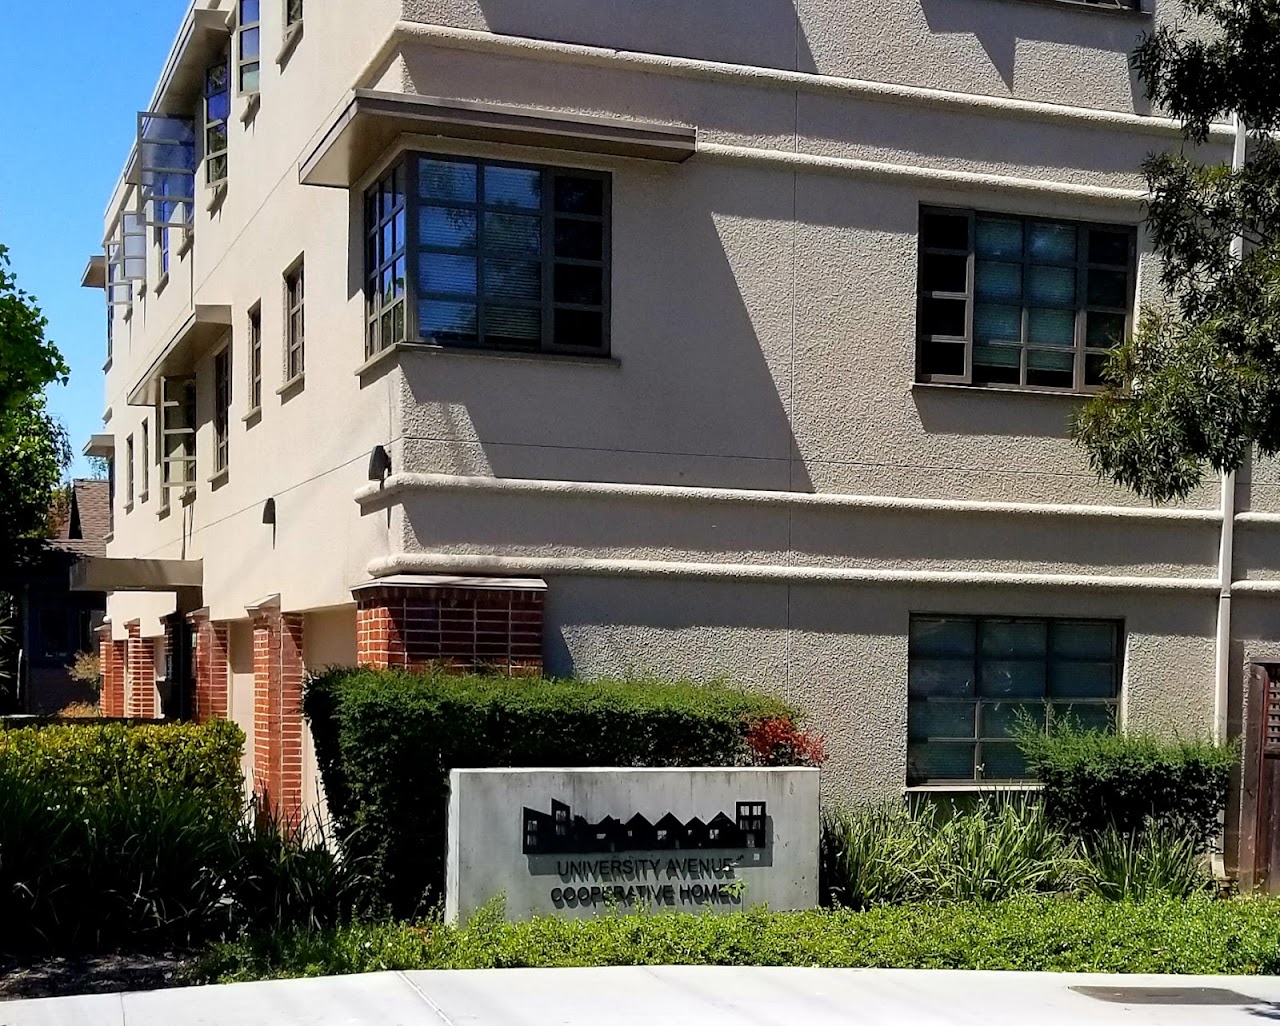 Photo of UNIVERSITY AVENUE COOPERATIVE HOUSING. Affordable housing located at 1471 ADDISON STREET BERKELEY, CA 94702